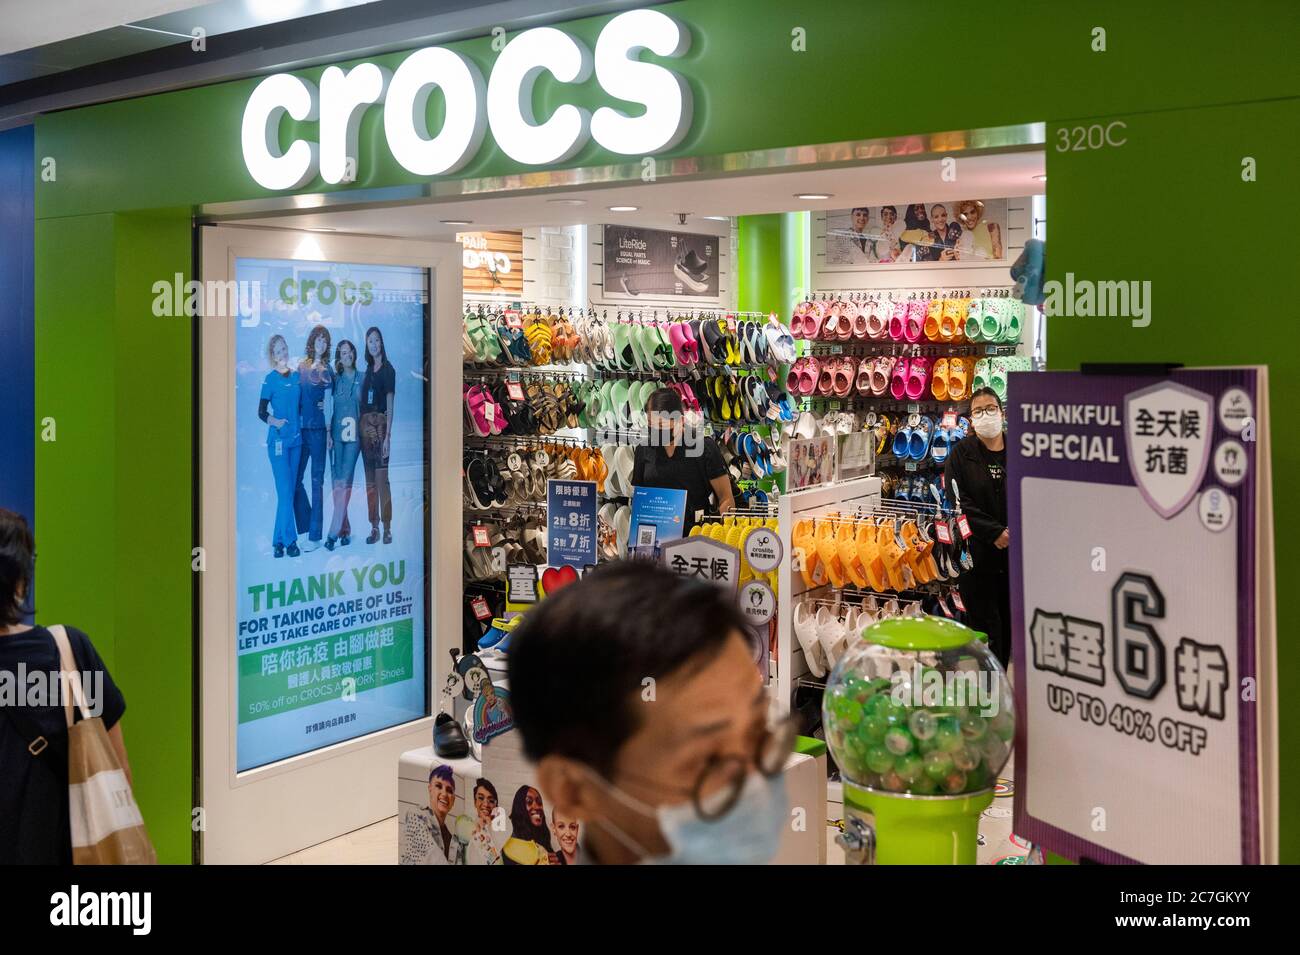 where is the crocs store